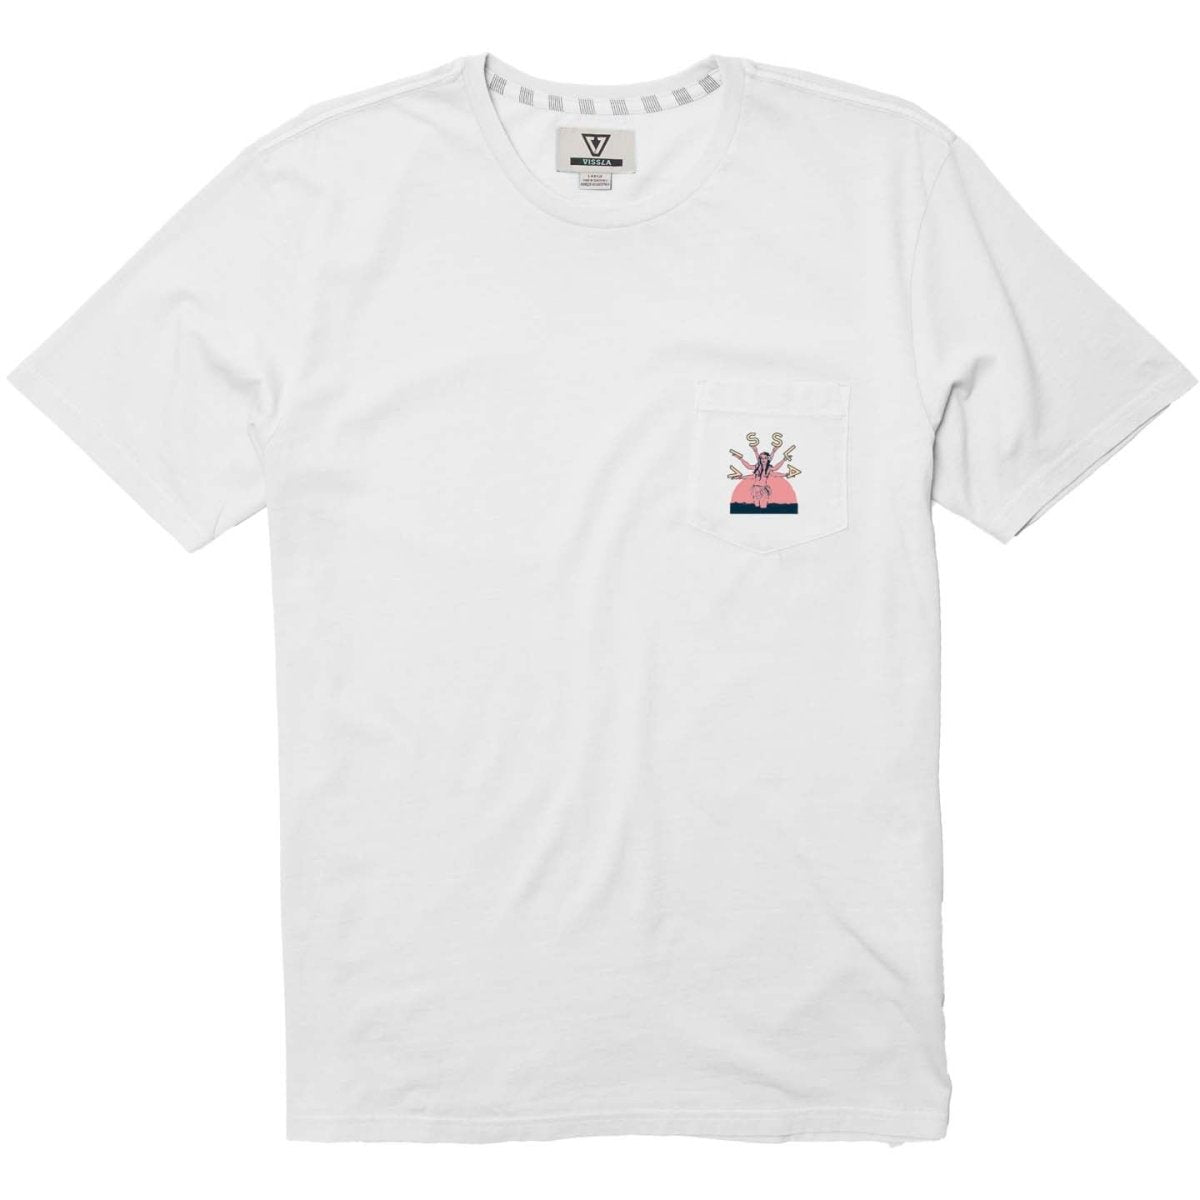 So Burnt SS PKT Tee White - The Good Chic